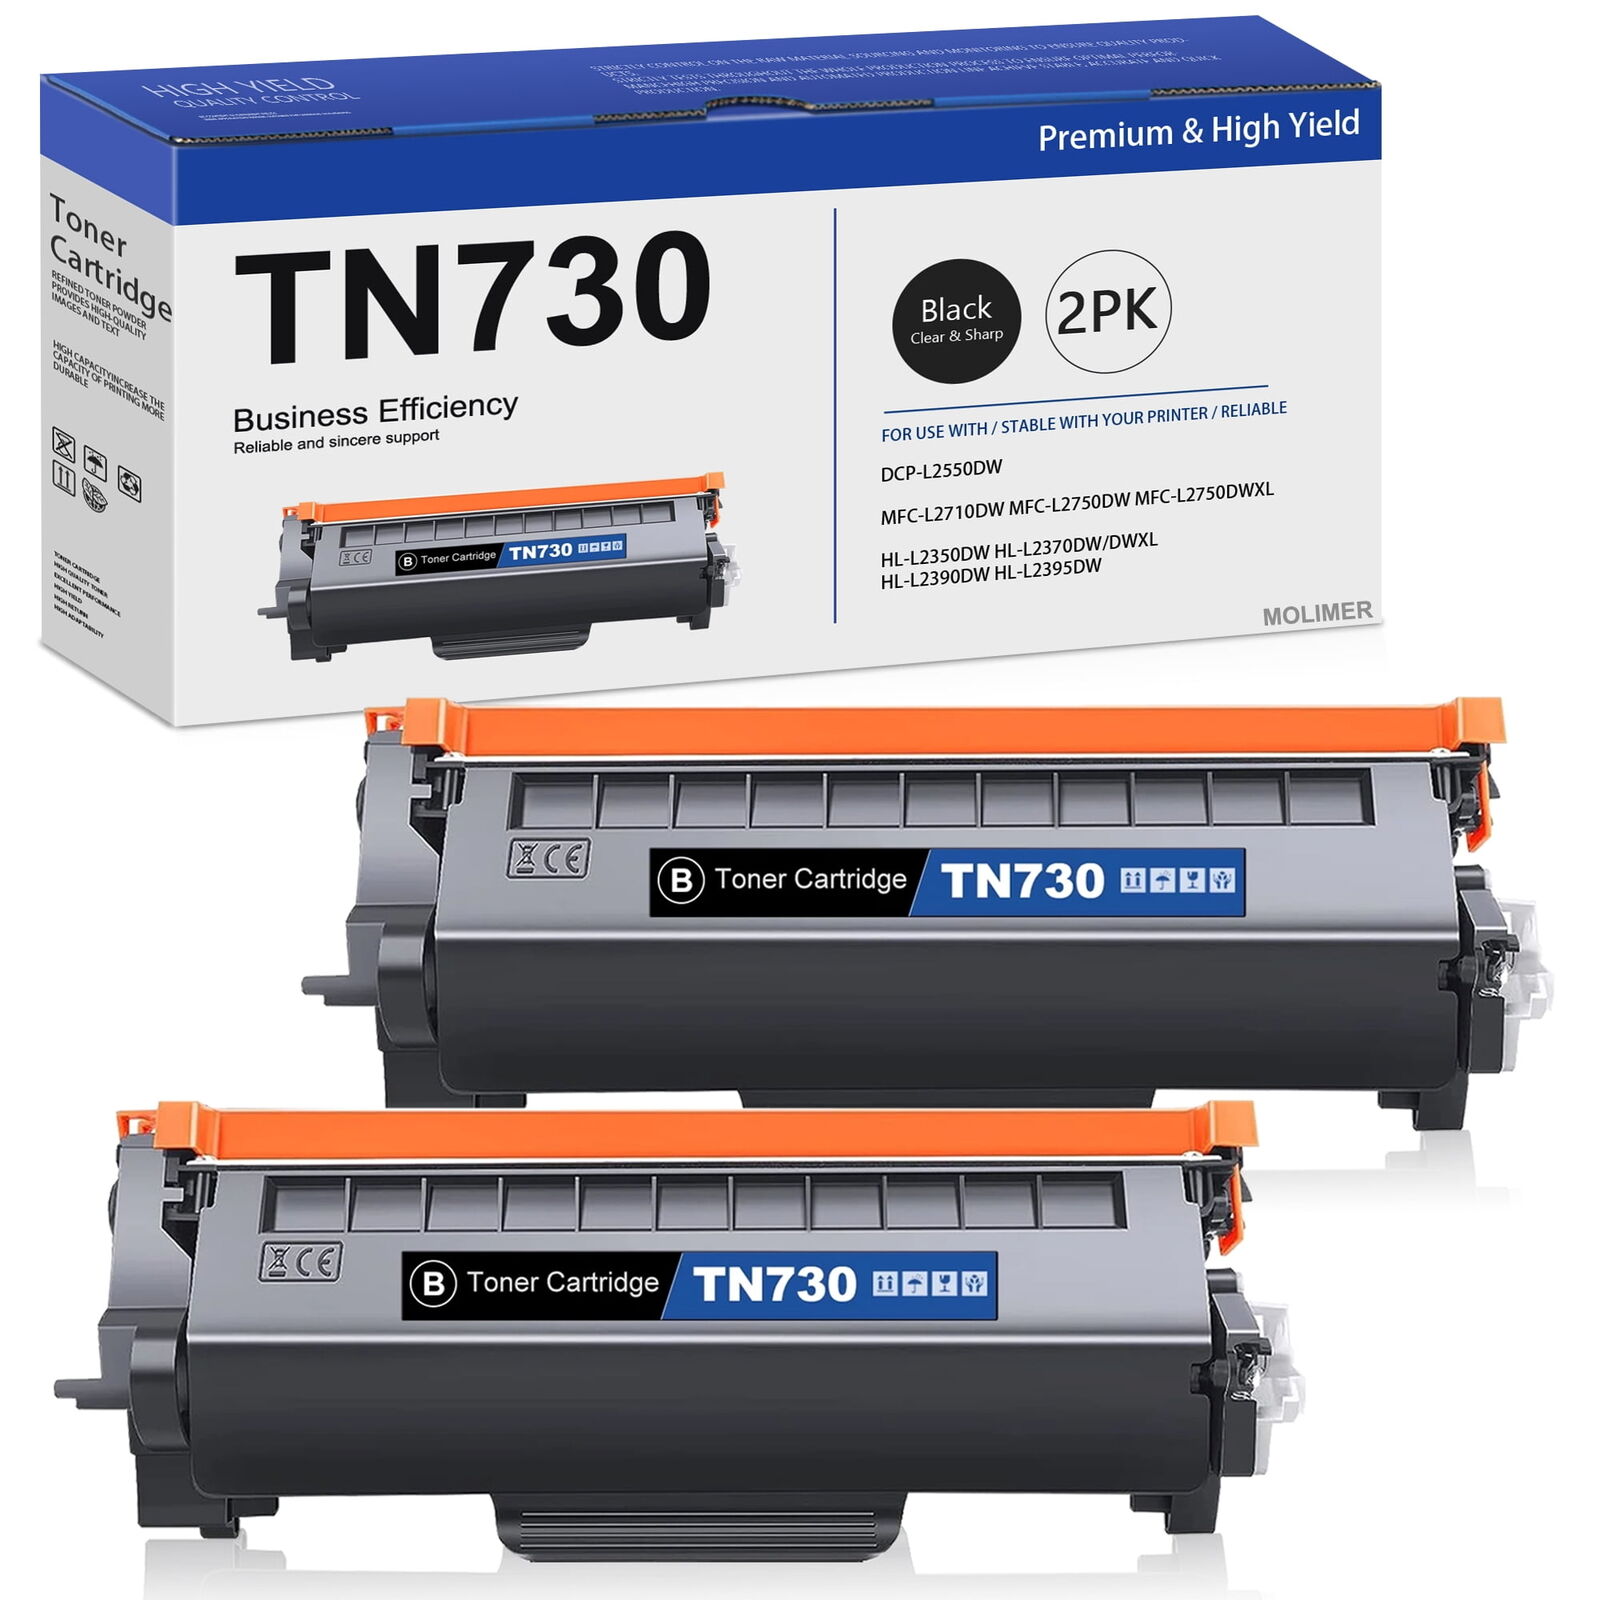 TN730 Toner Cartridge Replacement for Brother 2Black TN730 DCP-L2550DW Printer